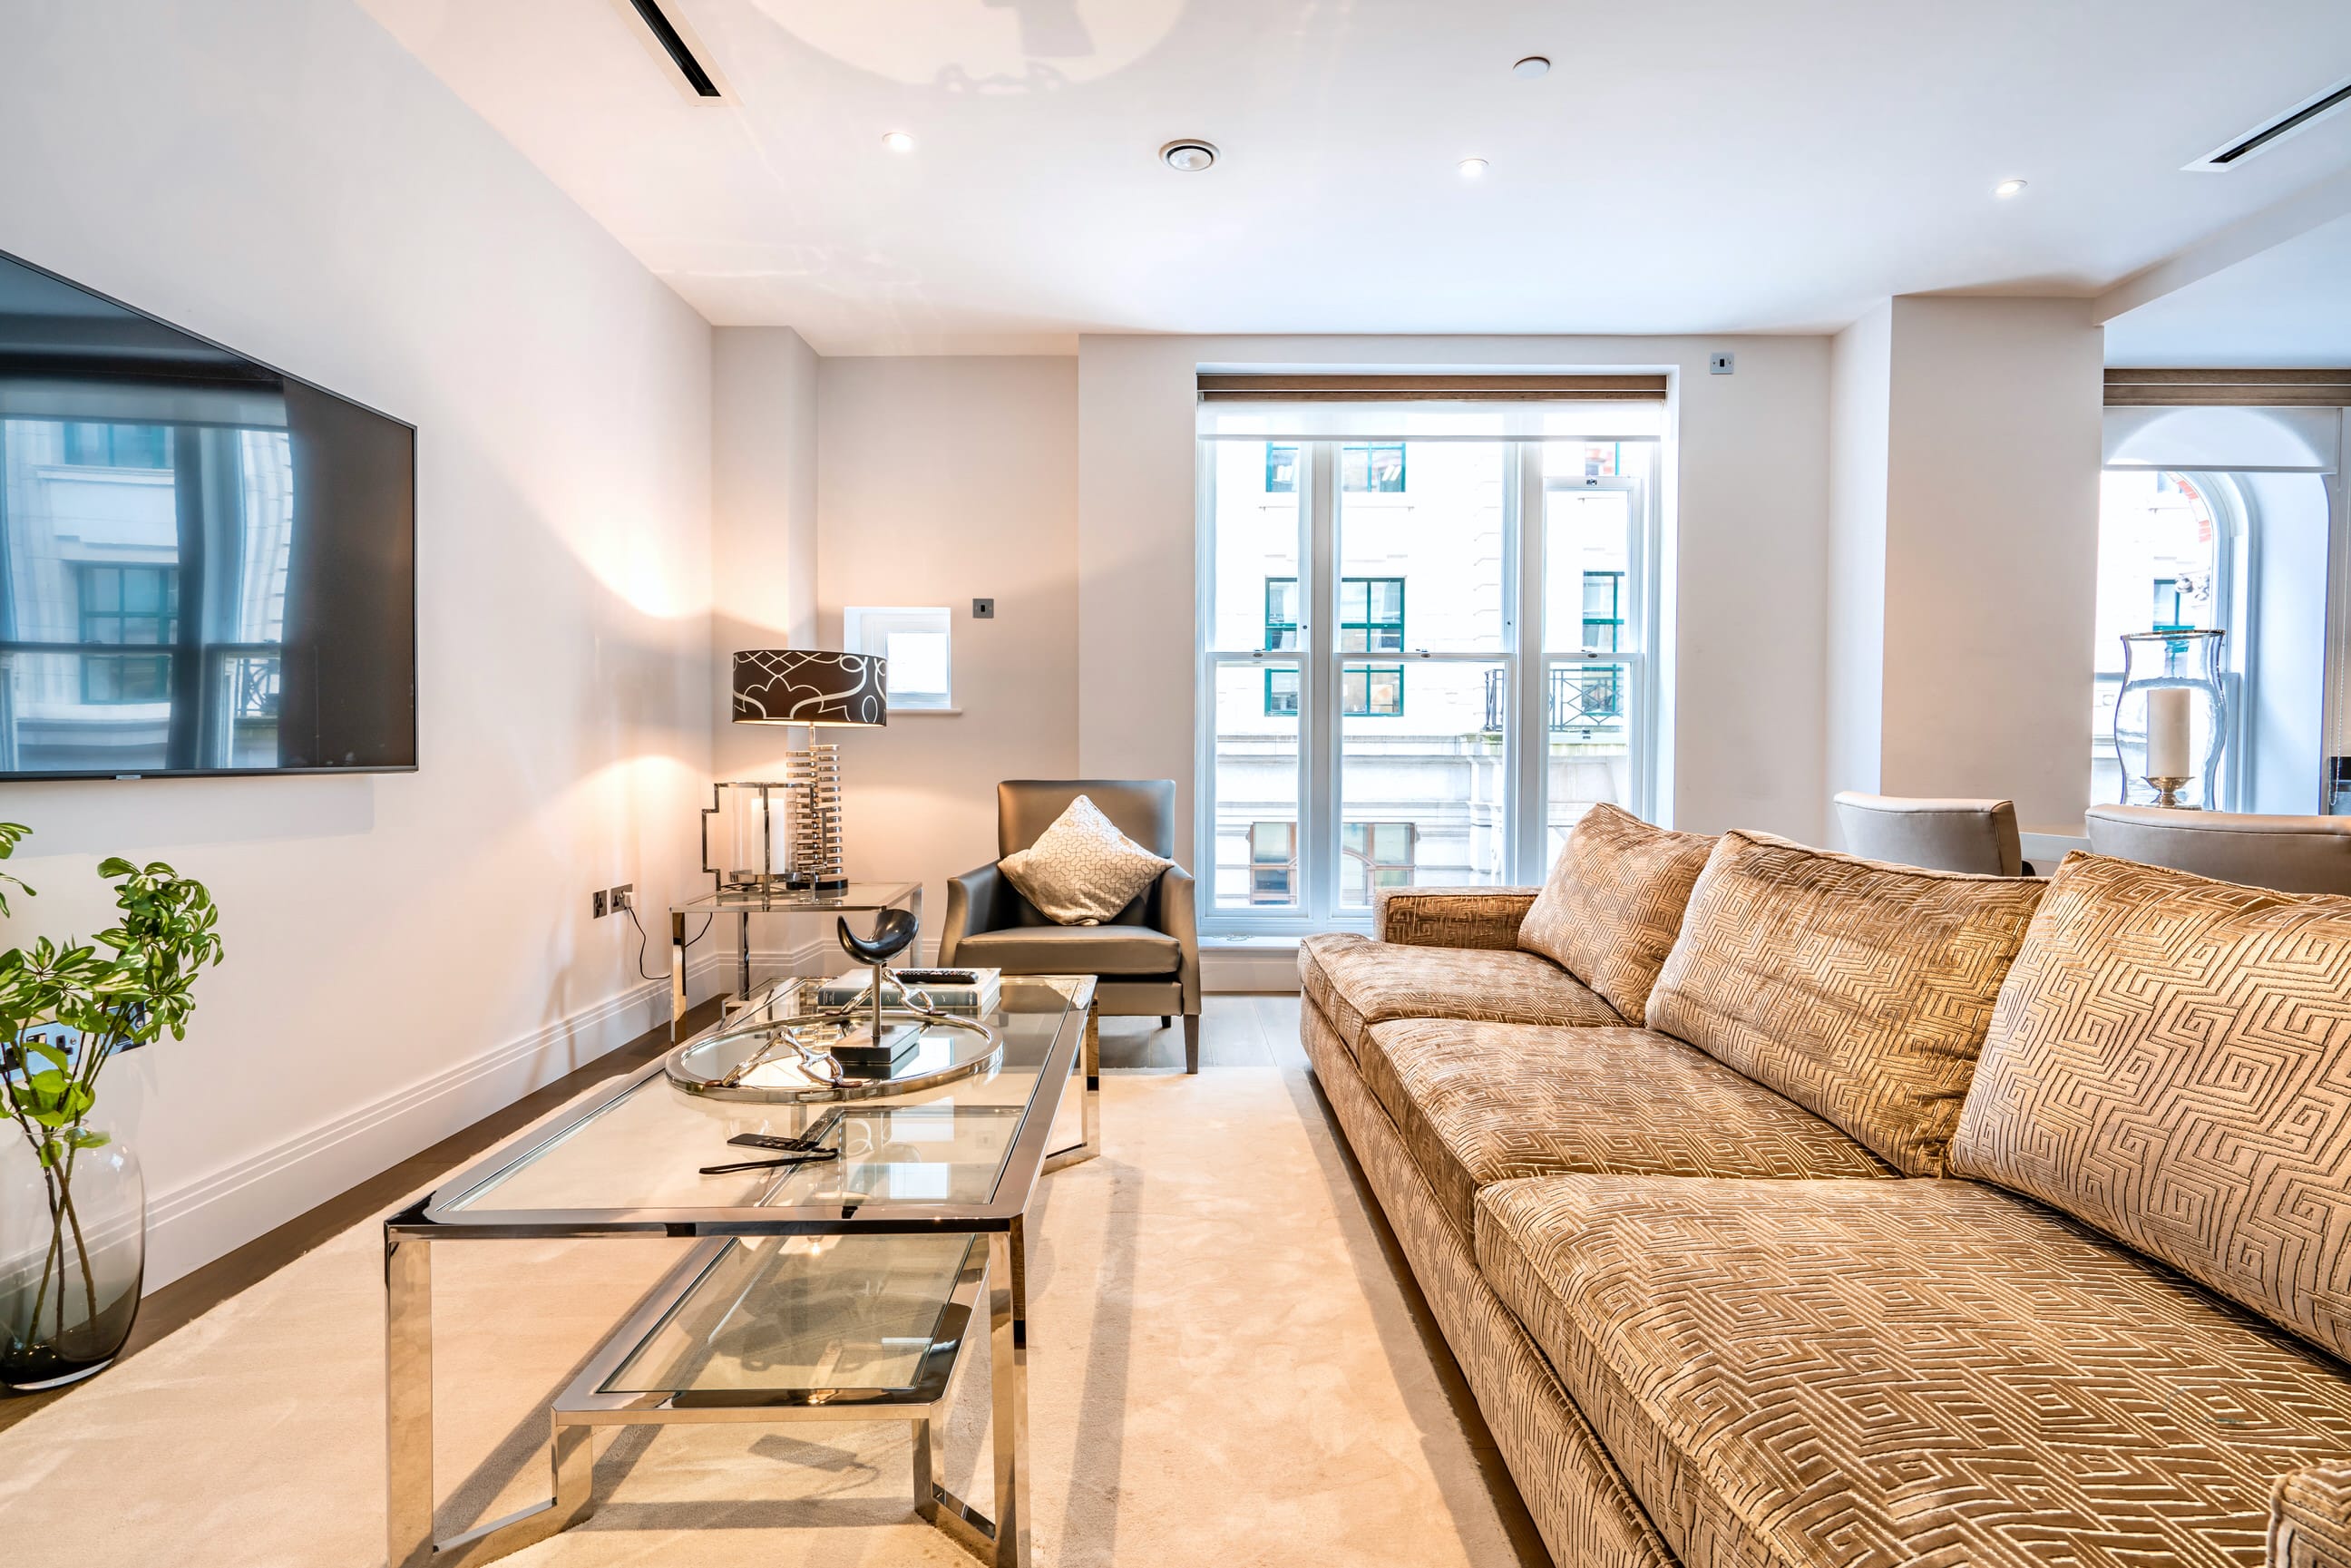 Property Image 2 - Remarkable Stylish Apartment near Many Attractions